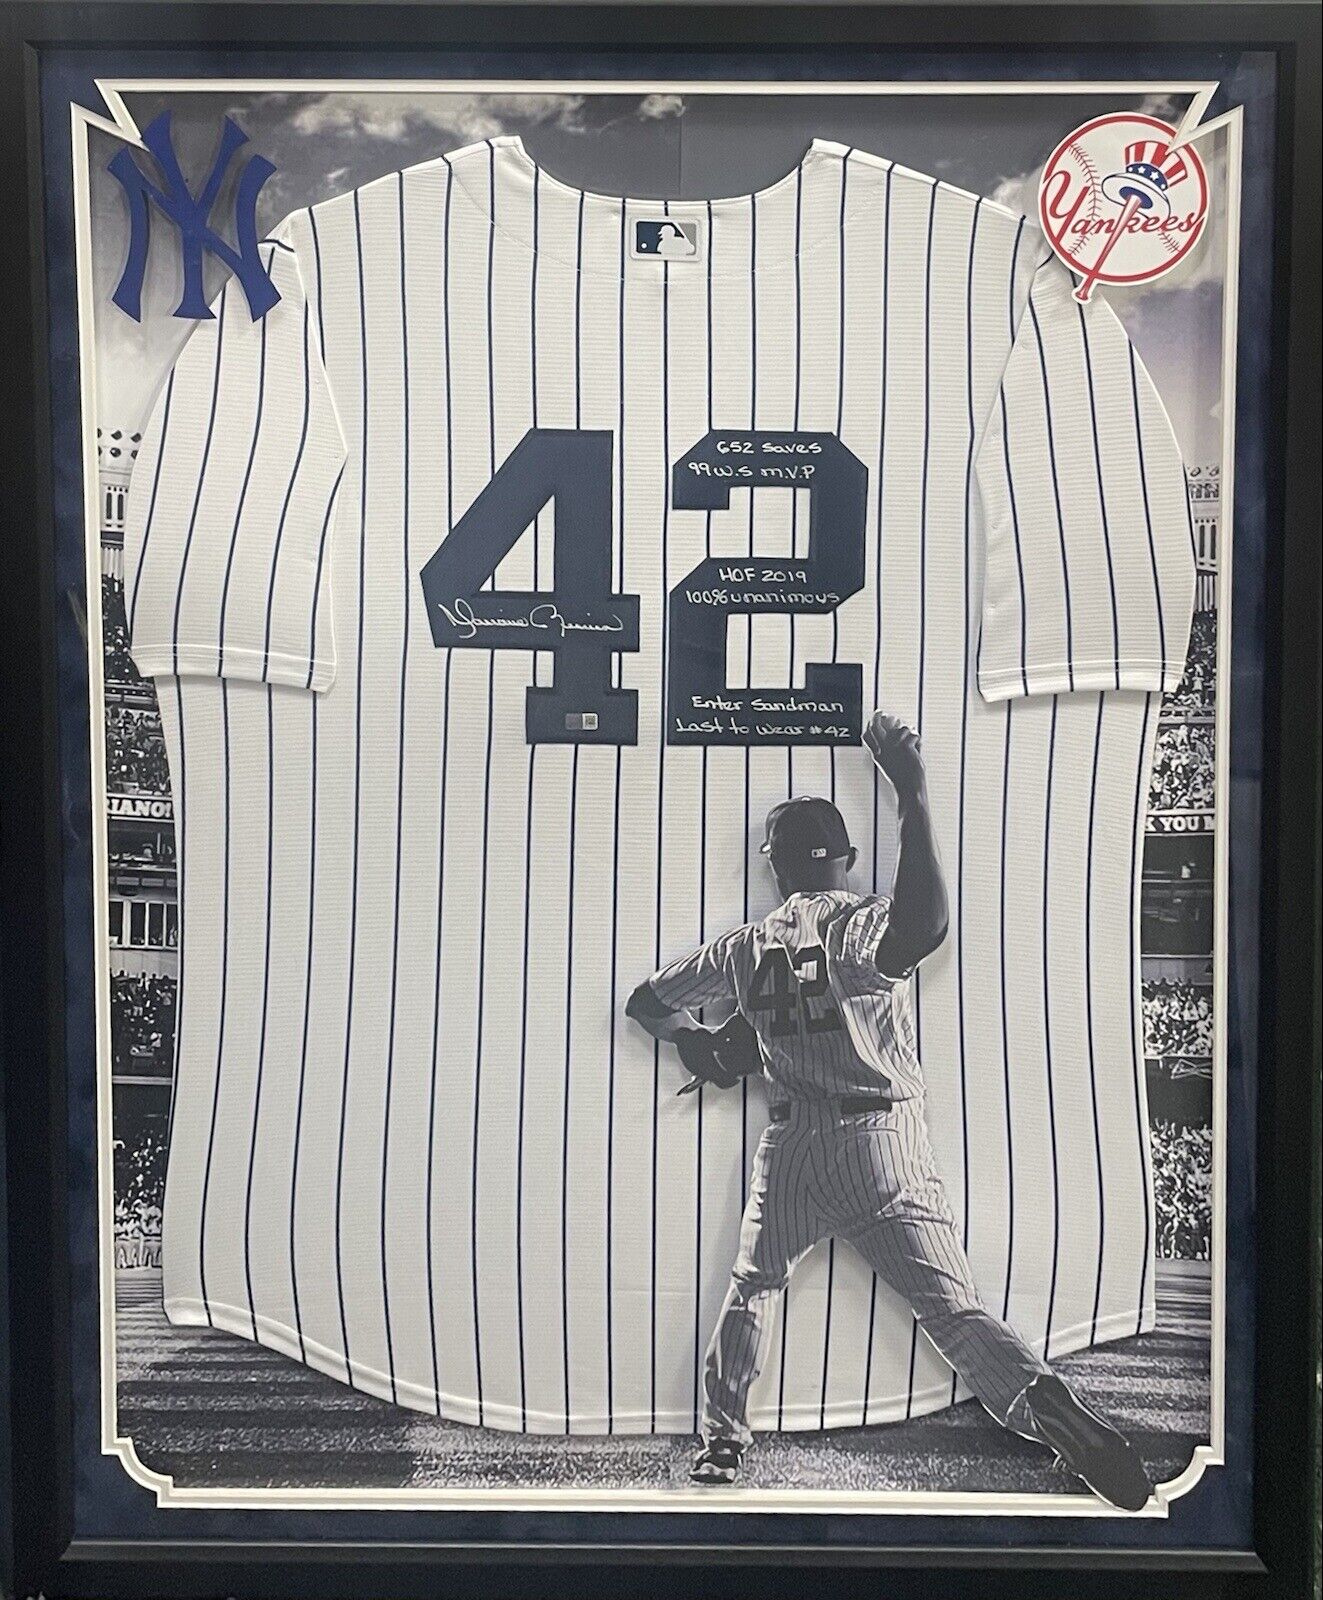 Mariano Rivera Autographed New York Yankees Jersey Inscribed HOF 2019